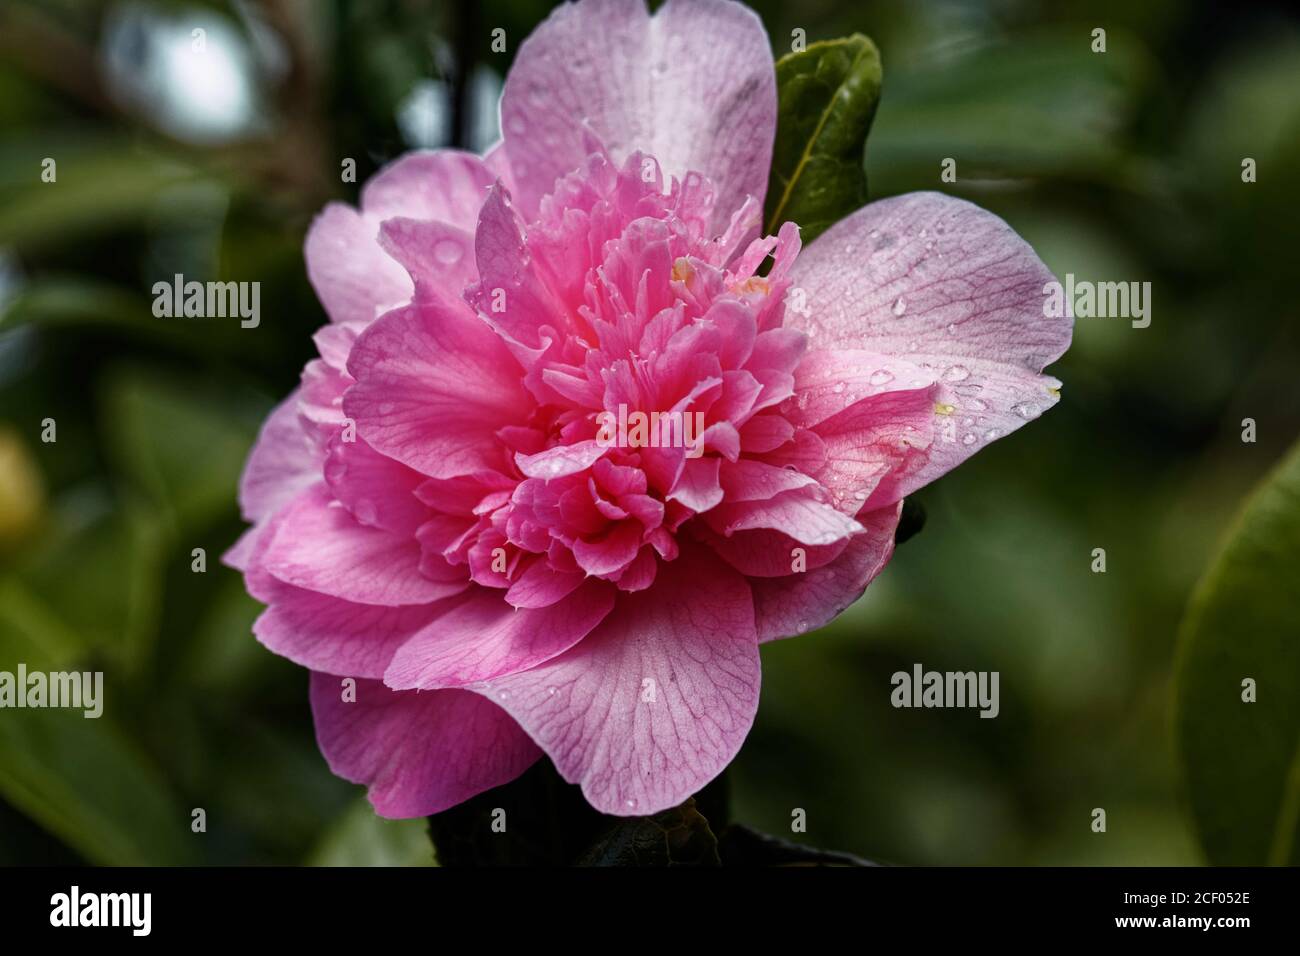 Camellia Ballet Queen:  Large salmon-rose pink camellia which flowers mid to late spring. Japonica type. Stock Photo